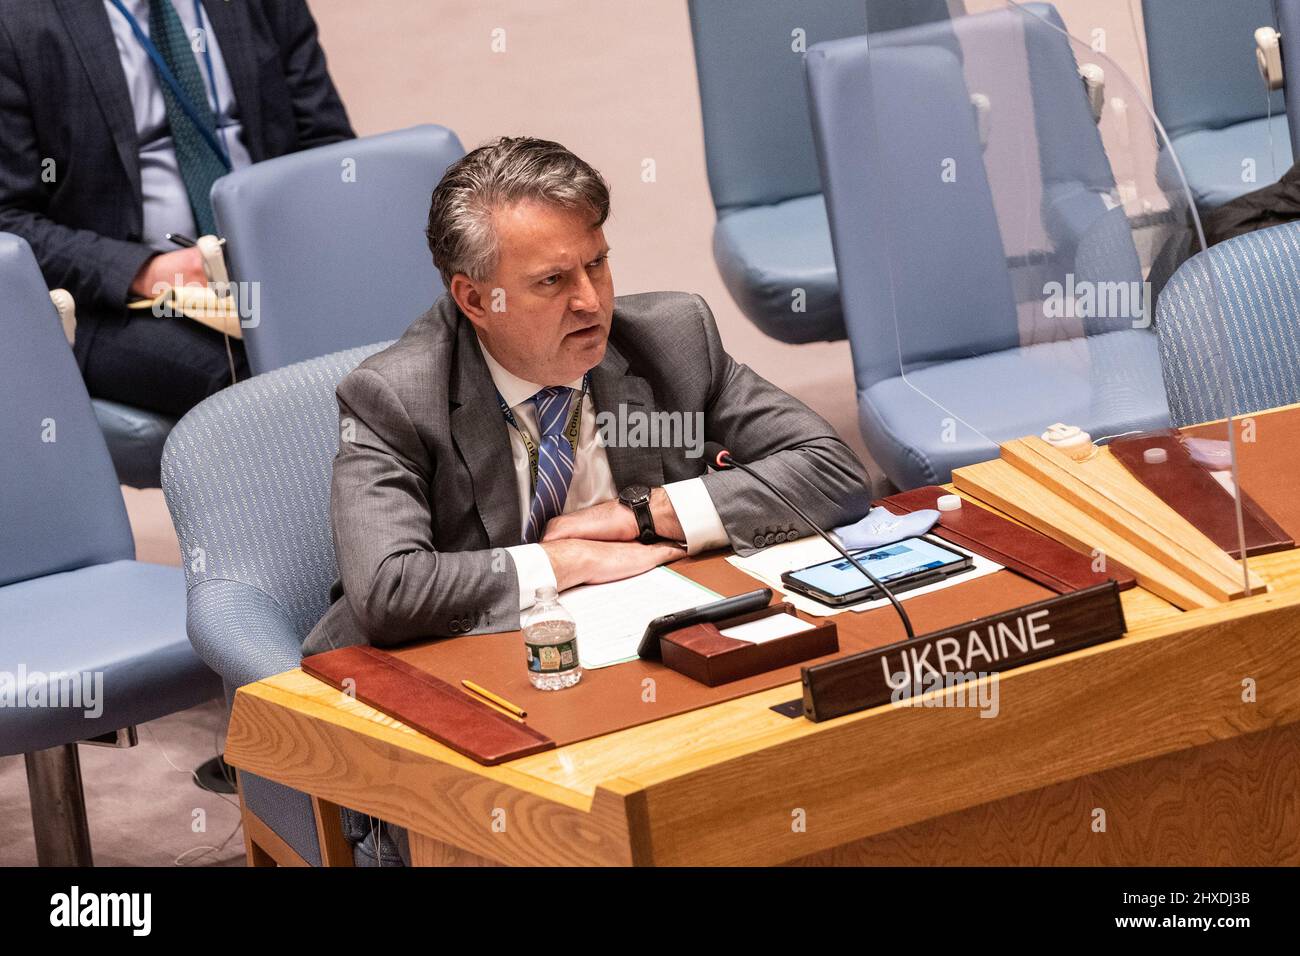 New York, USA. 11th Mar, 2022. Ukrainian Ambassador Sergiy Kyslytsya speaks at Security Council meeting at UN Headquarters in New York on March 11, 2022. Meeting was convened at the request of the Russian Federation who accused Ukraine of developing biological weapons under the tutelage of the United States without providing any evidence. (Photo by Lev Radin/Sipa USA) Credit: Sipa USA/Alamy Live News Stock Photo